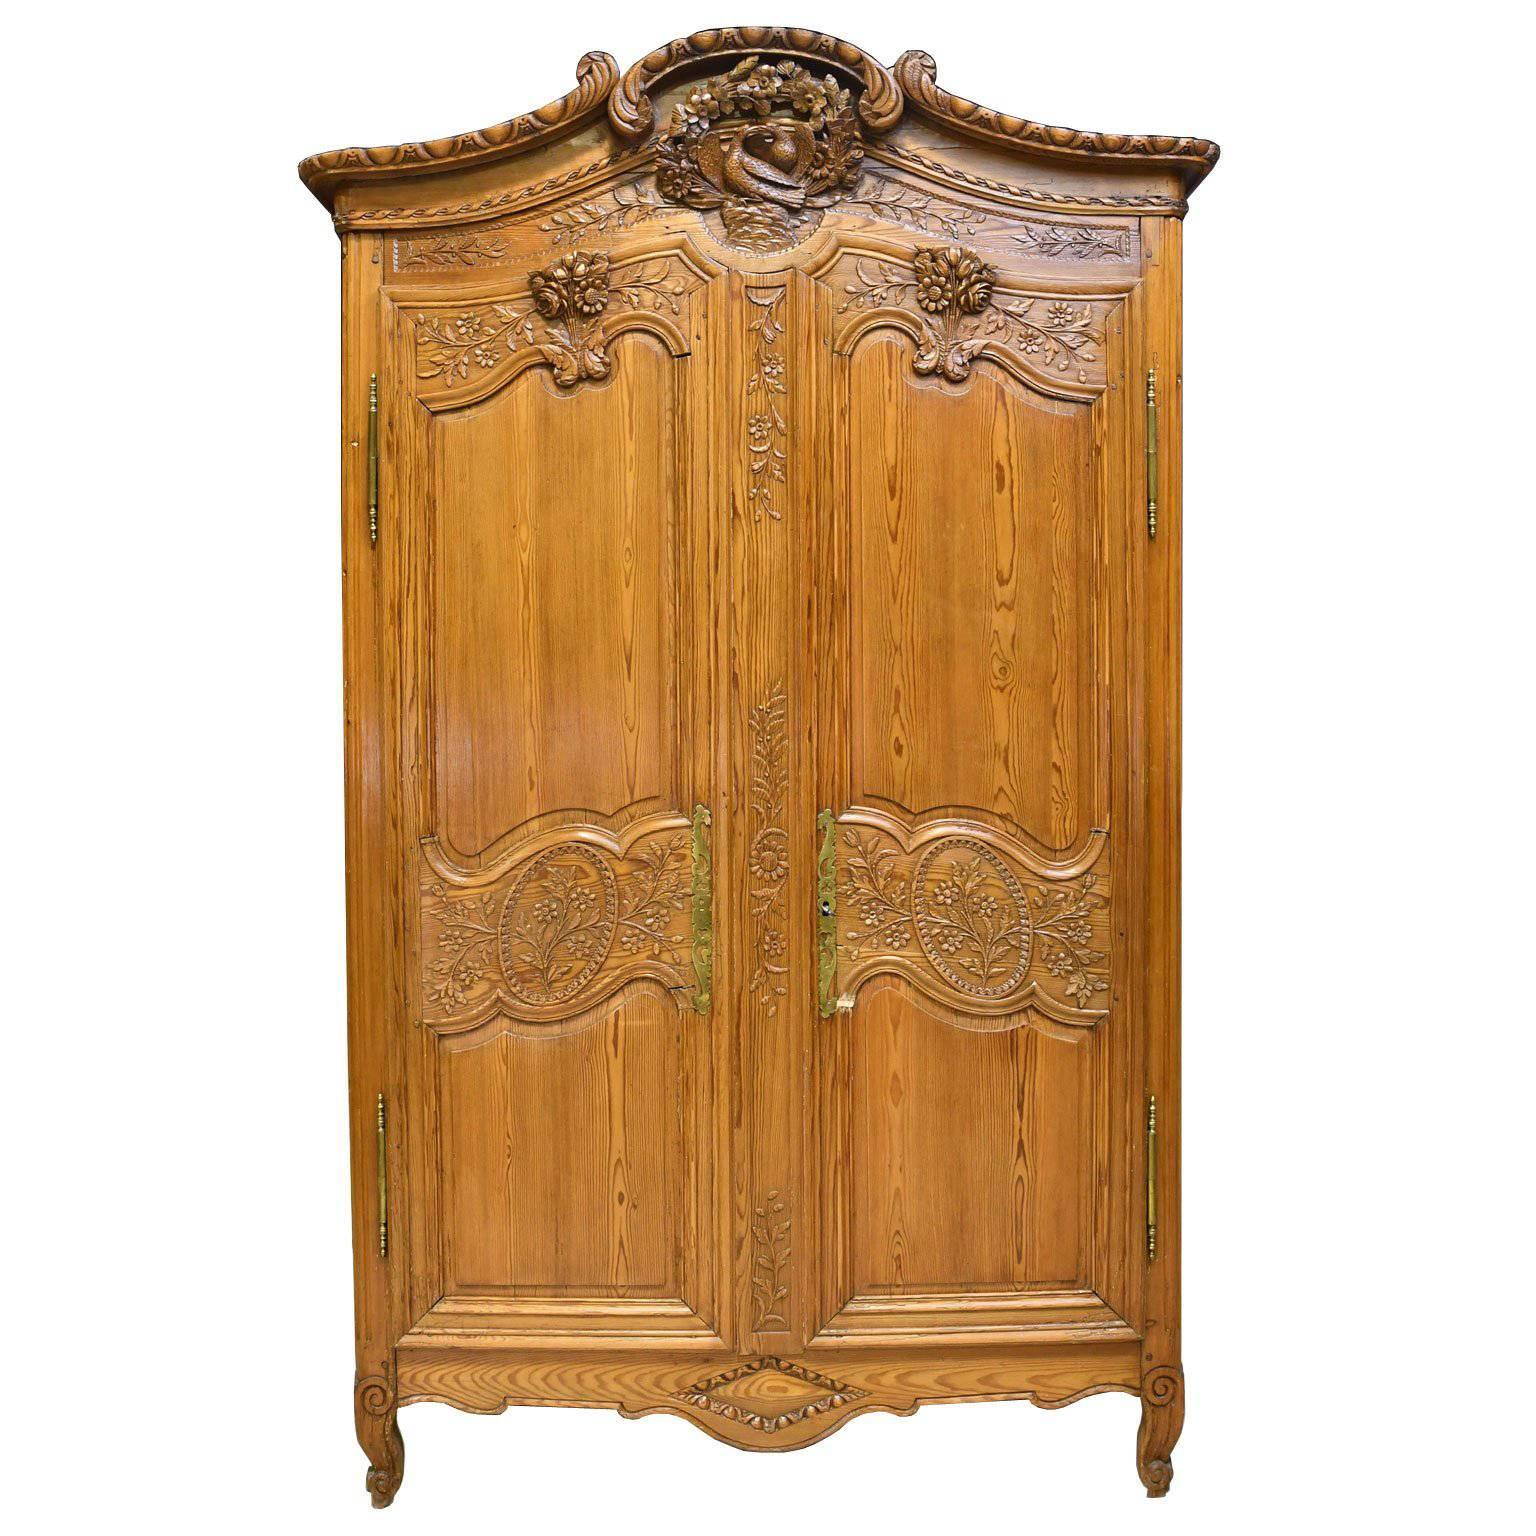 18th Century French Marriage Armoire in Pitch Pine from Normandy